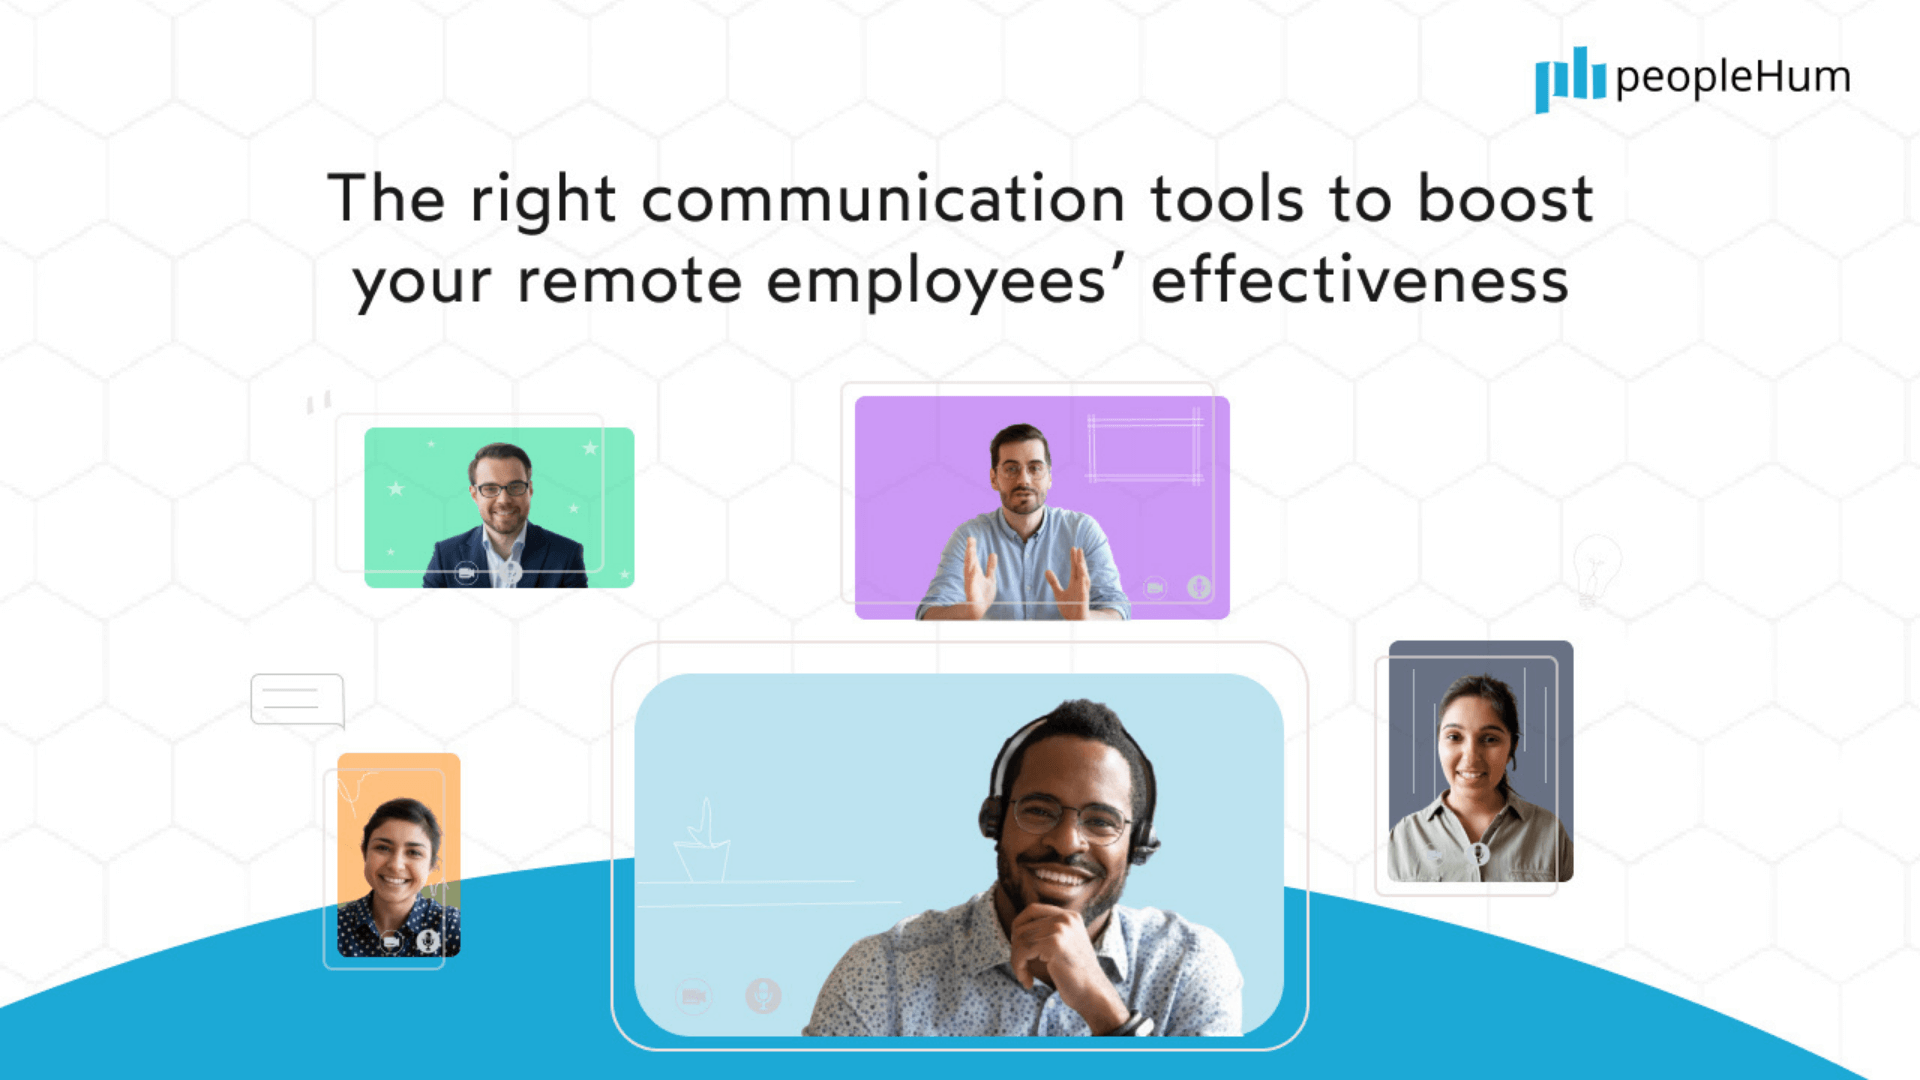 The right communication tools to boost your remote employees' effectiveness